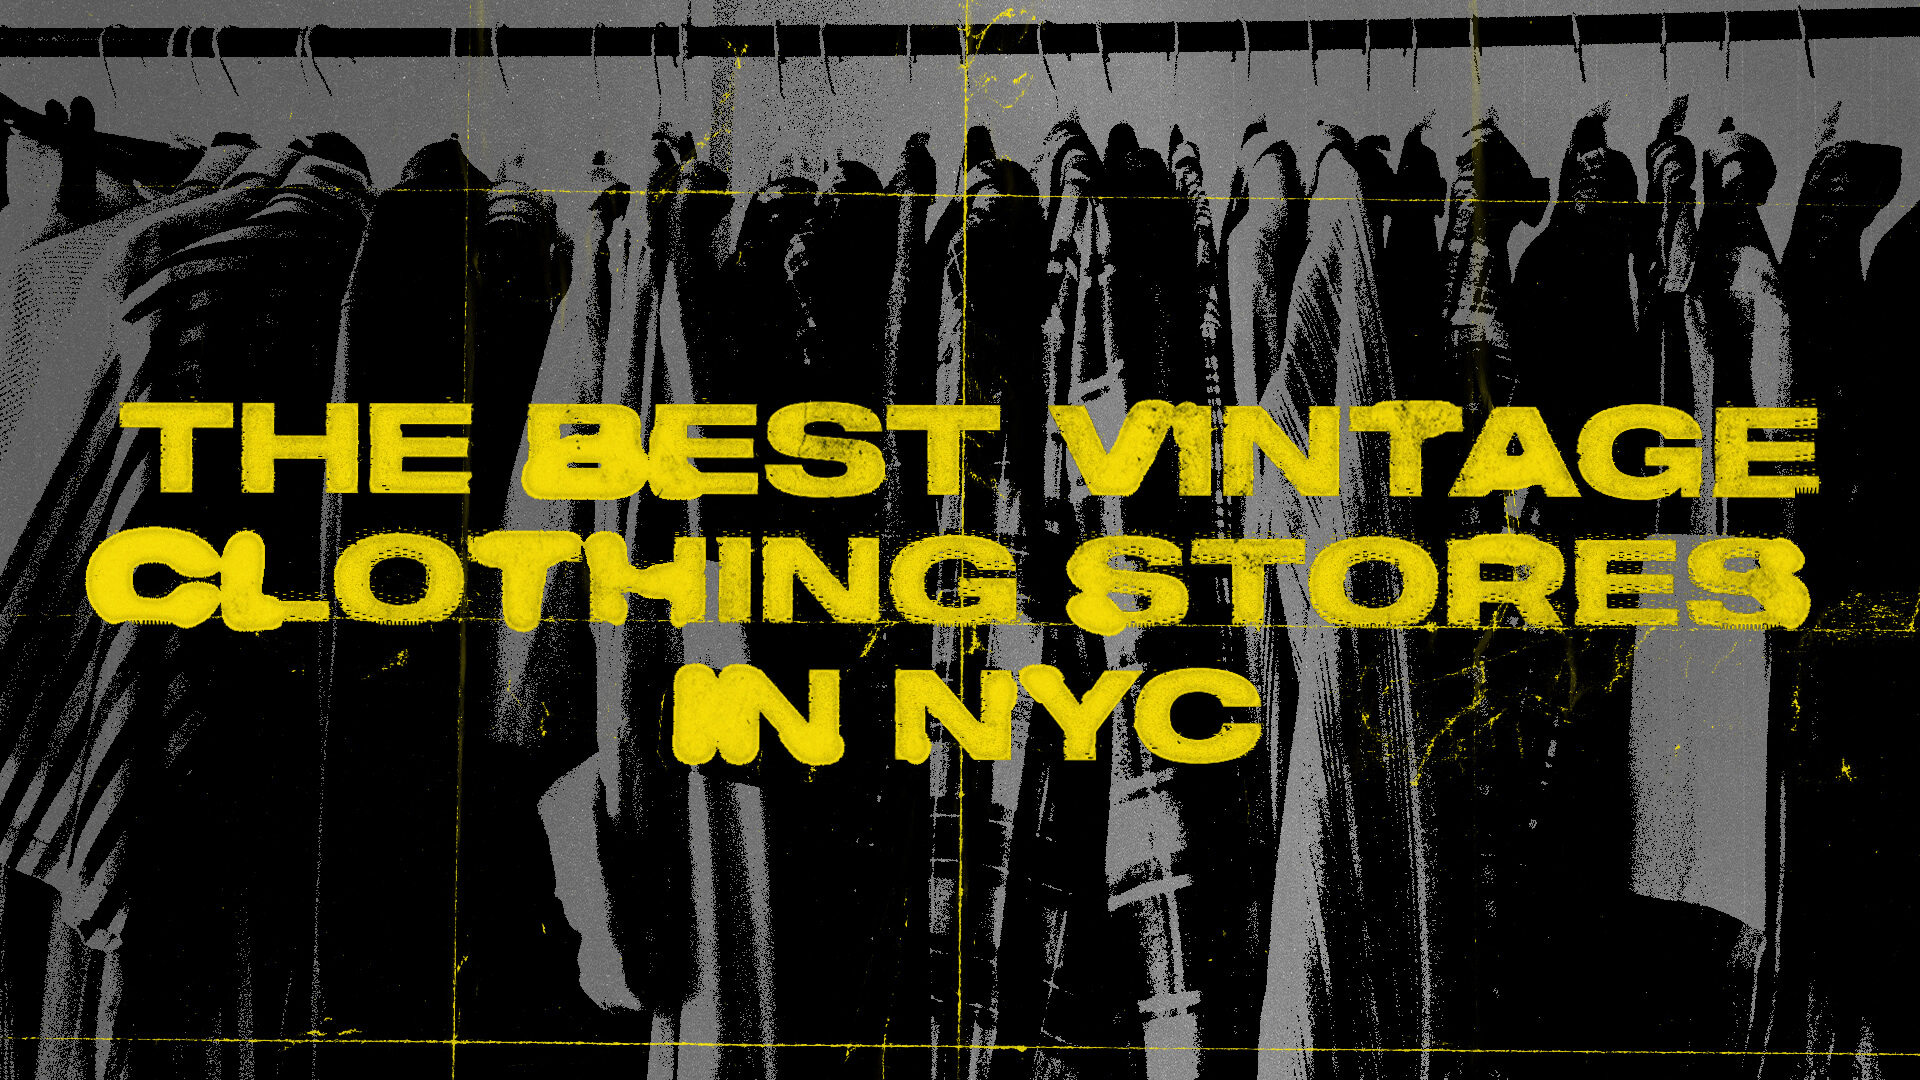 Best vintage clothes shopping in Louisville